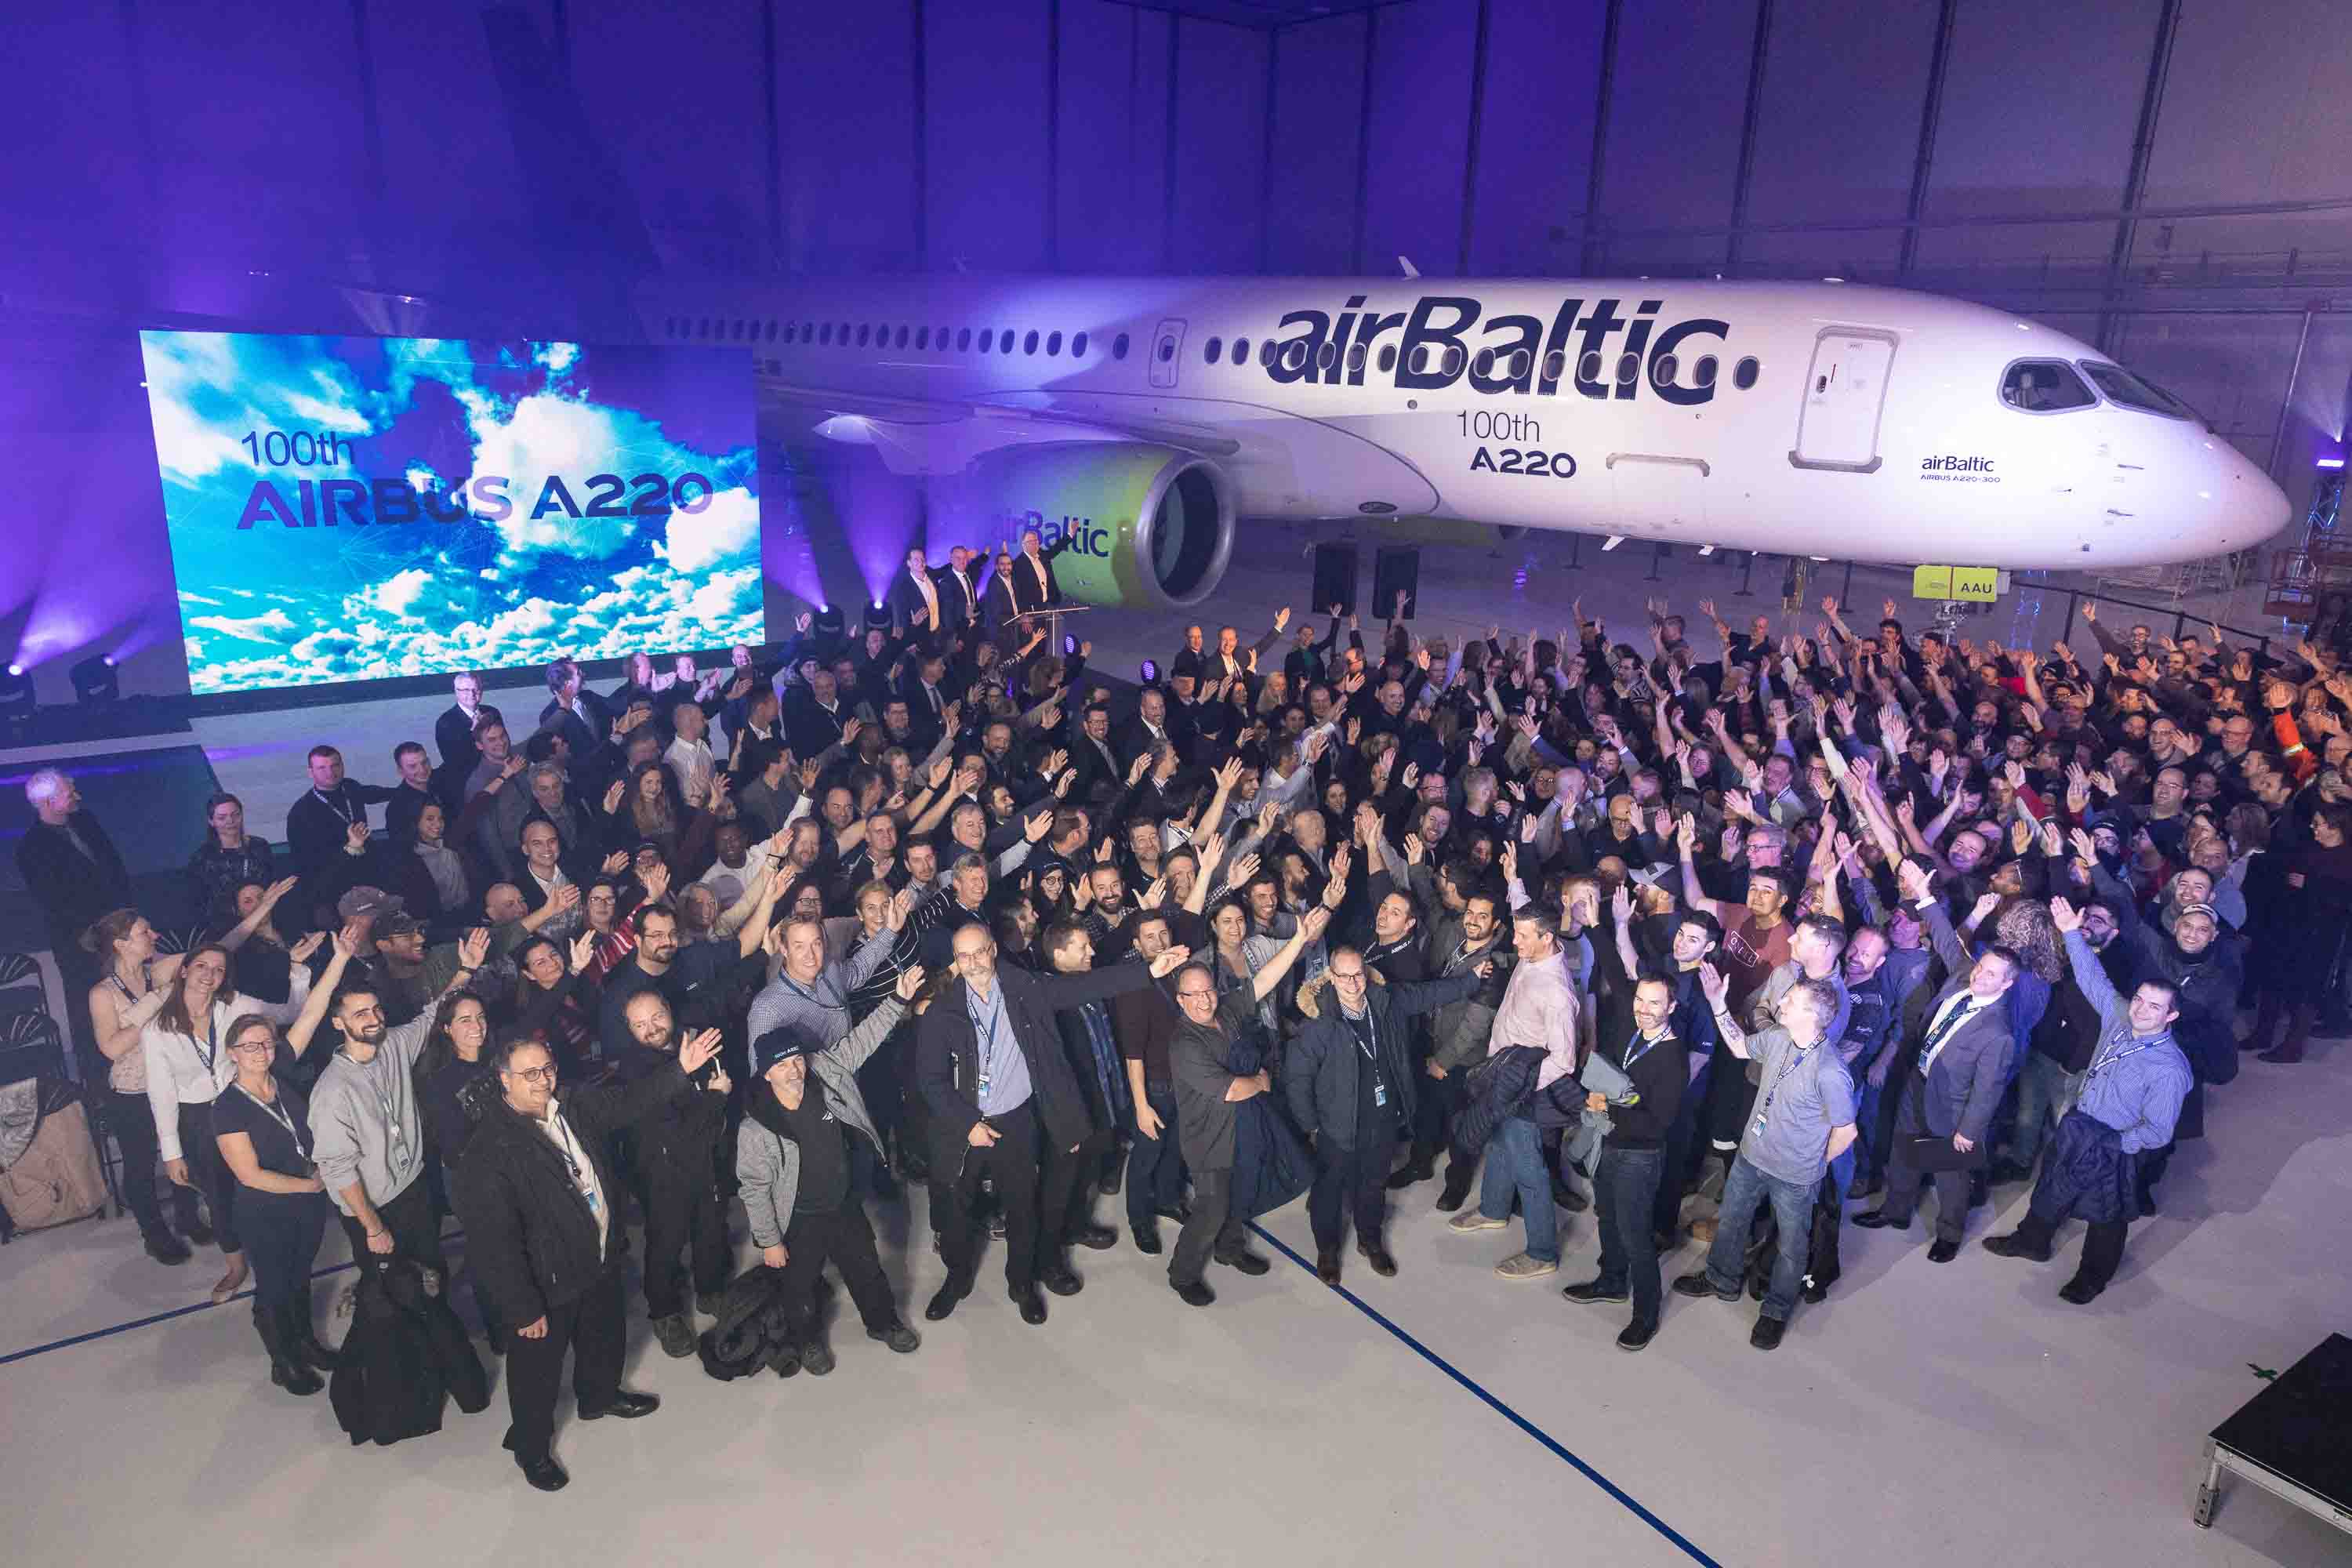 Airbus celebrates the 100th A220 aircraft produced | Destination ...